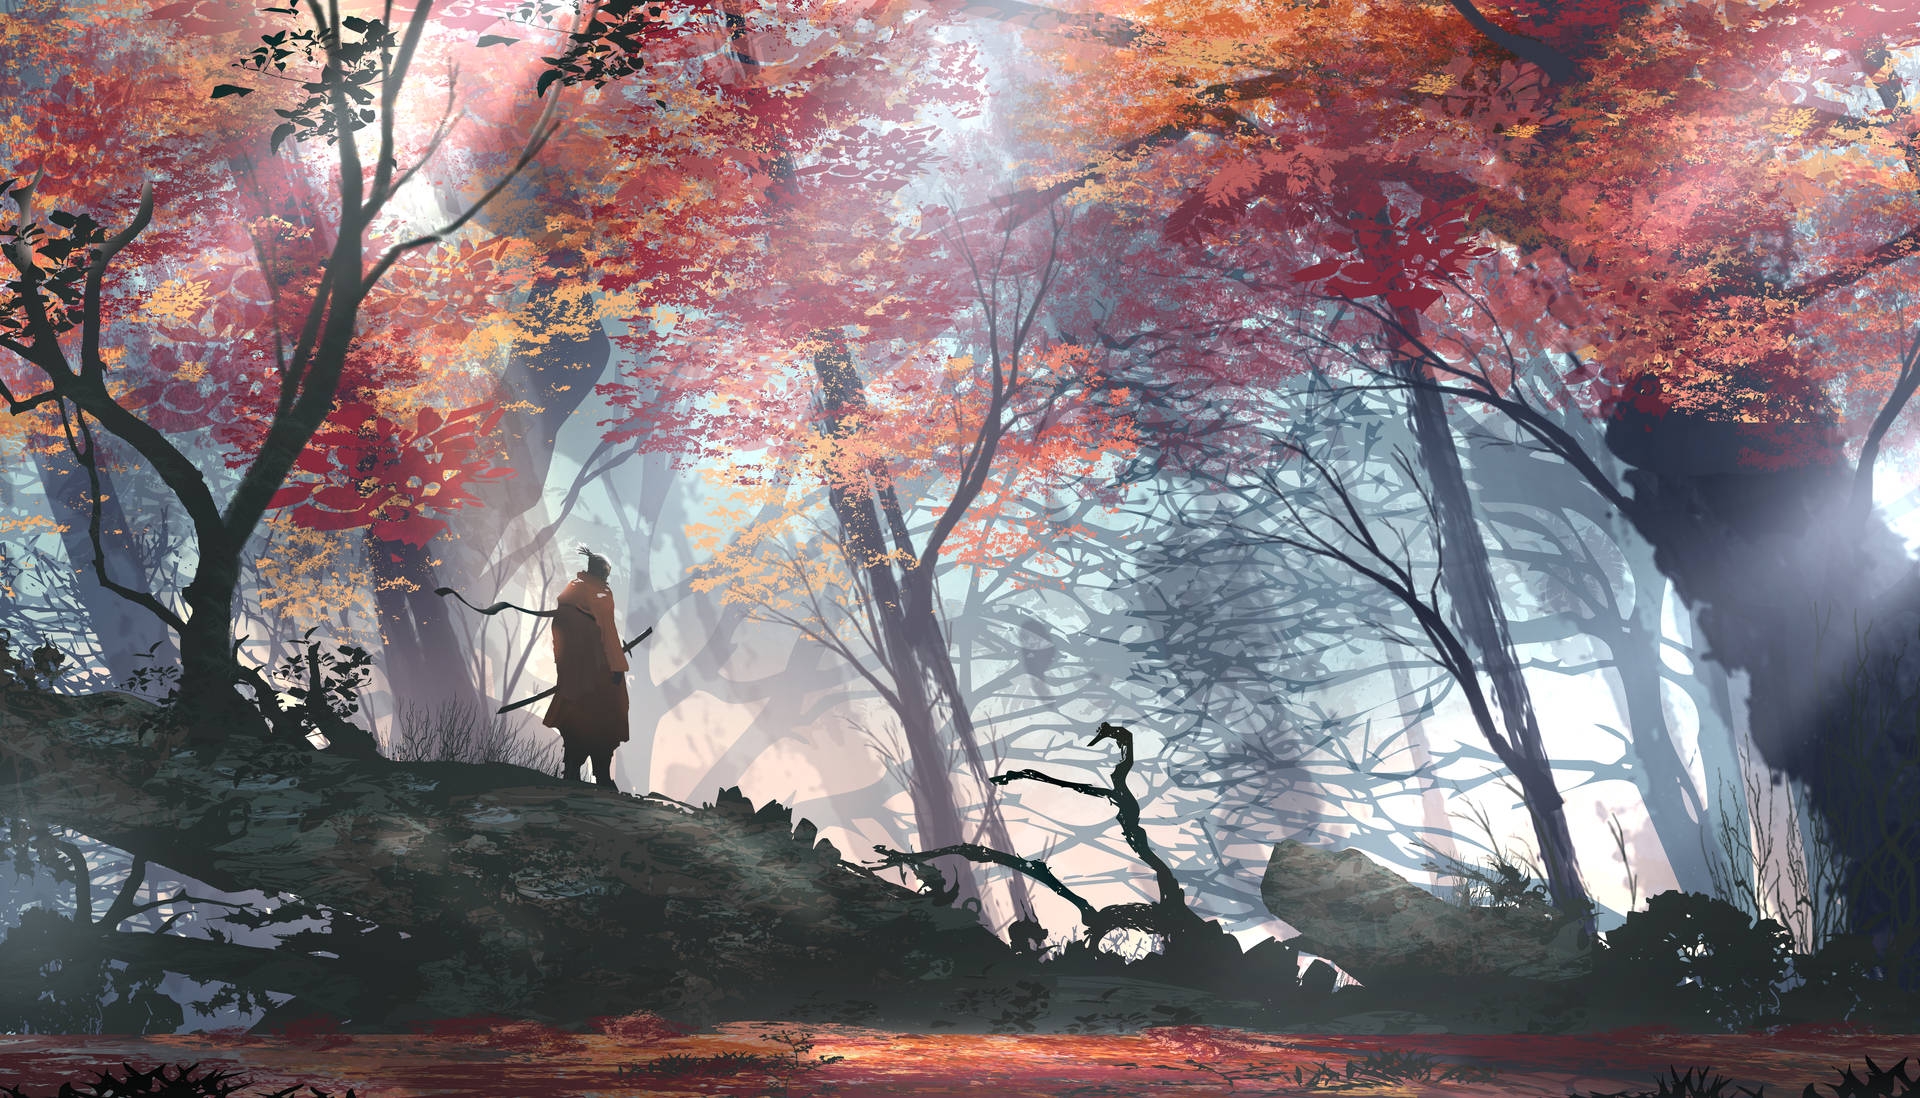 A rendering of a picture of a samurai in the woods